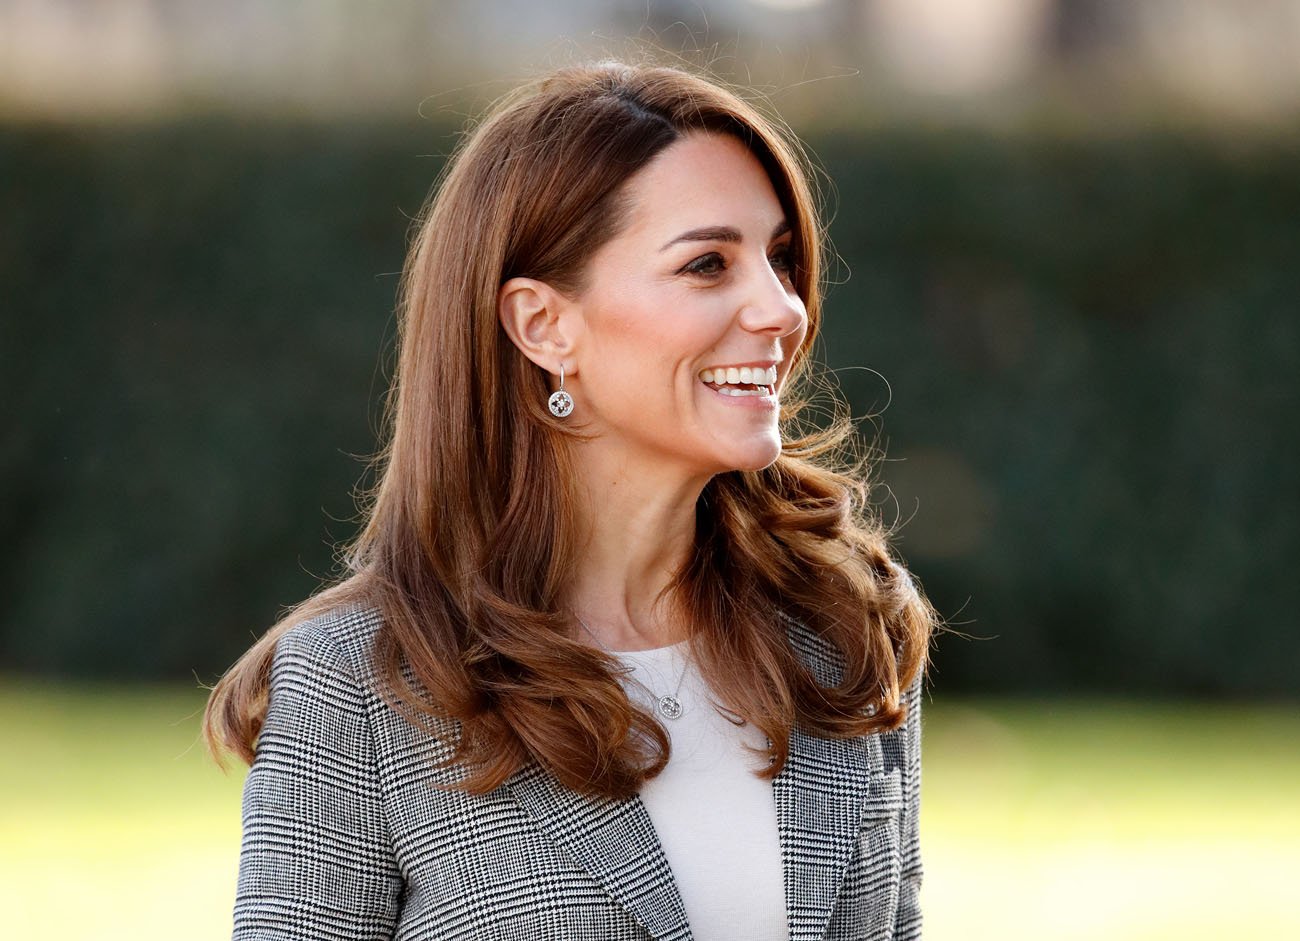 Catherine, Duchess of Cambridge attends Shout's Crisis Volunteer celebration event at Troubadour White City Theatre on November 12, 2019 in London, England.